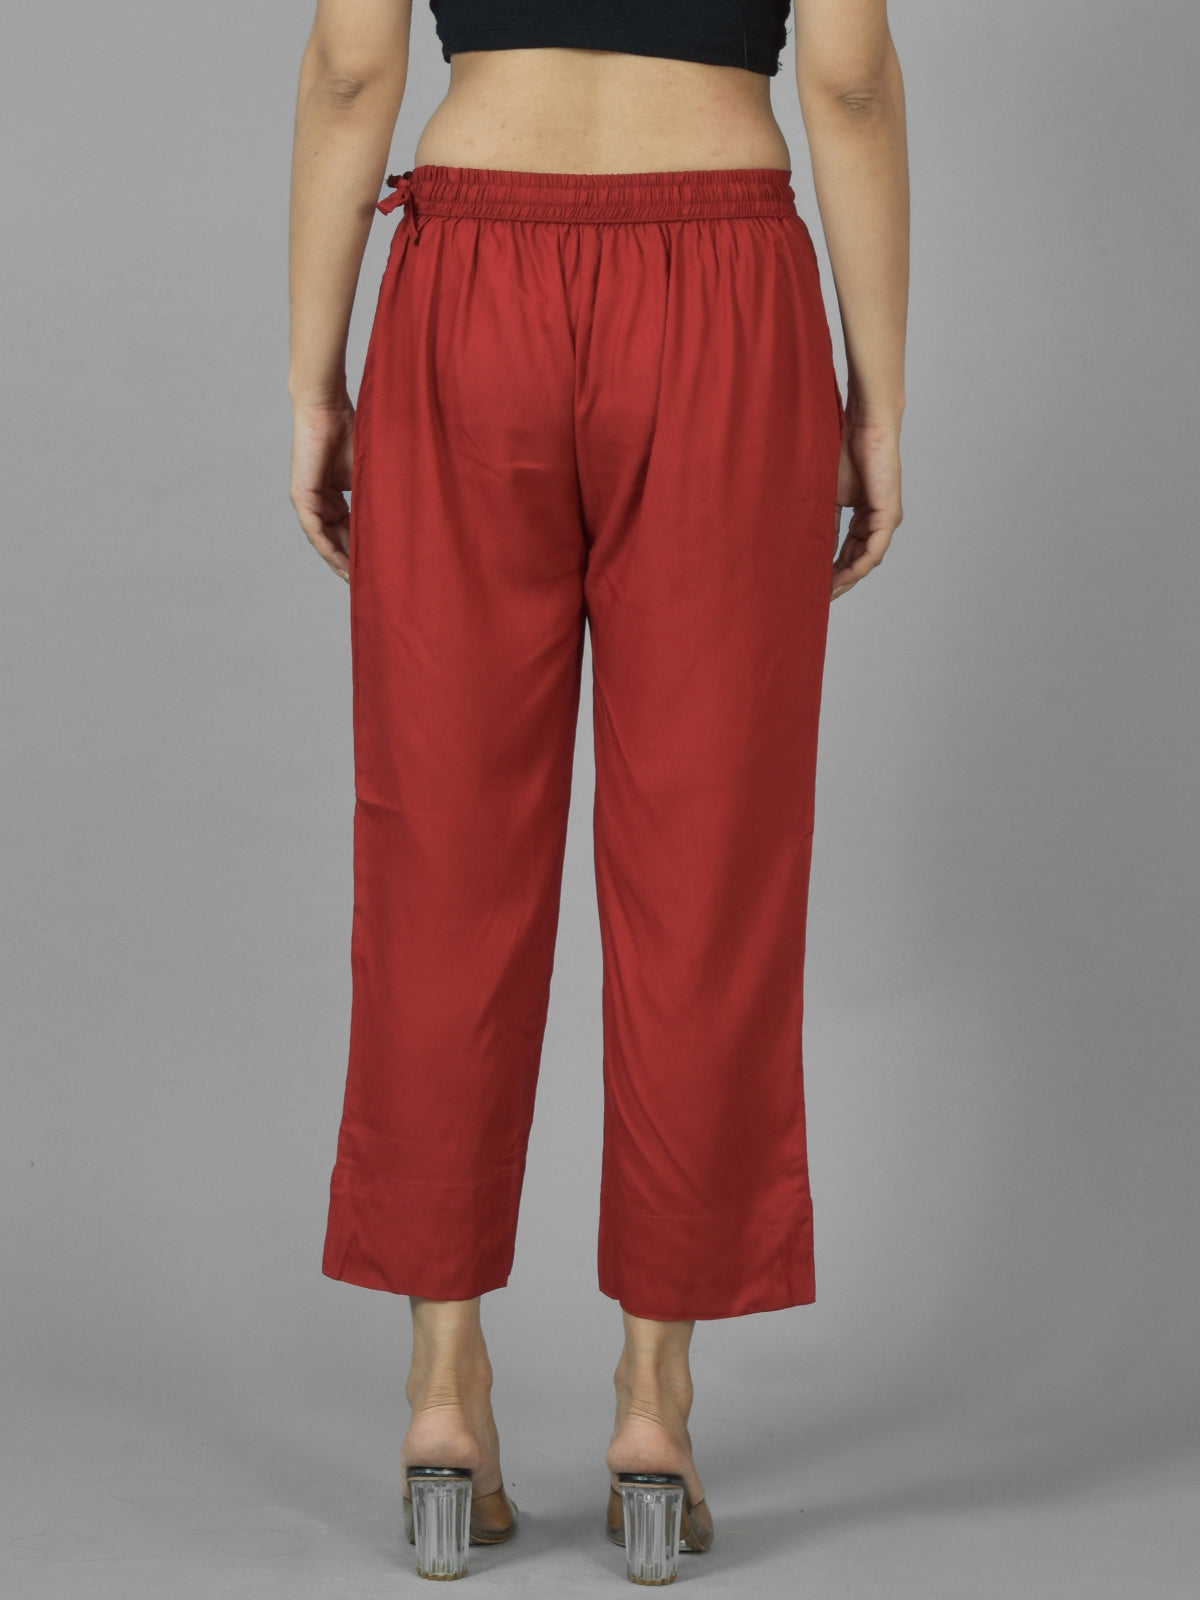 Women Solid Maroon Rayon Culottes Trouser